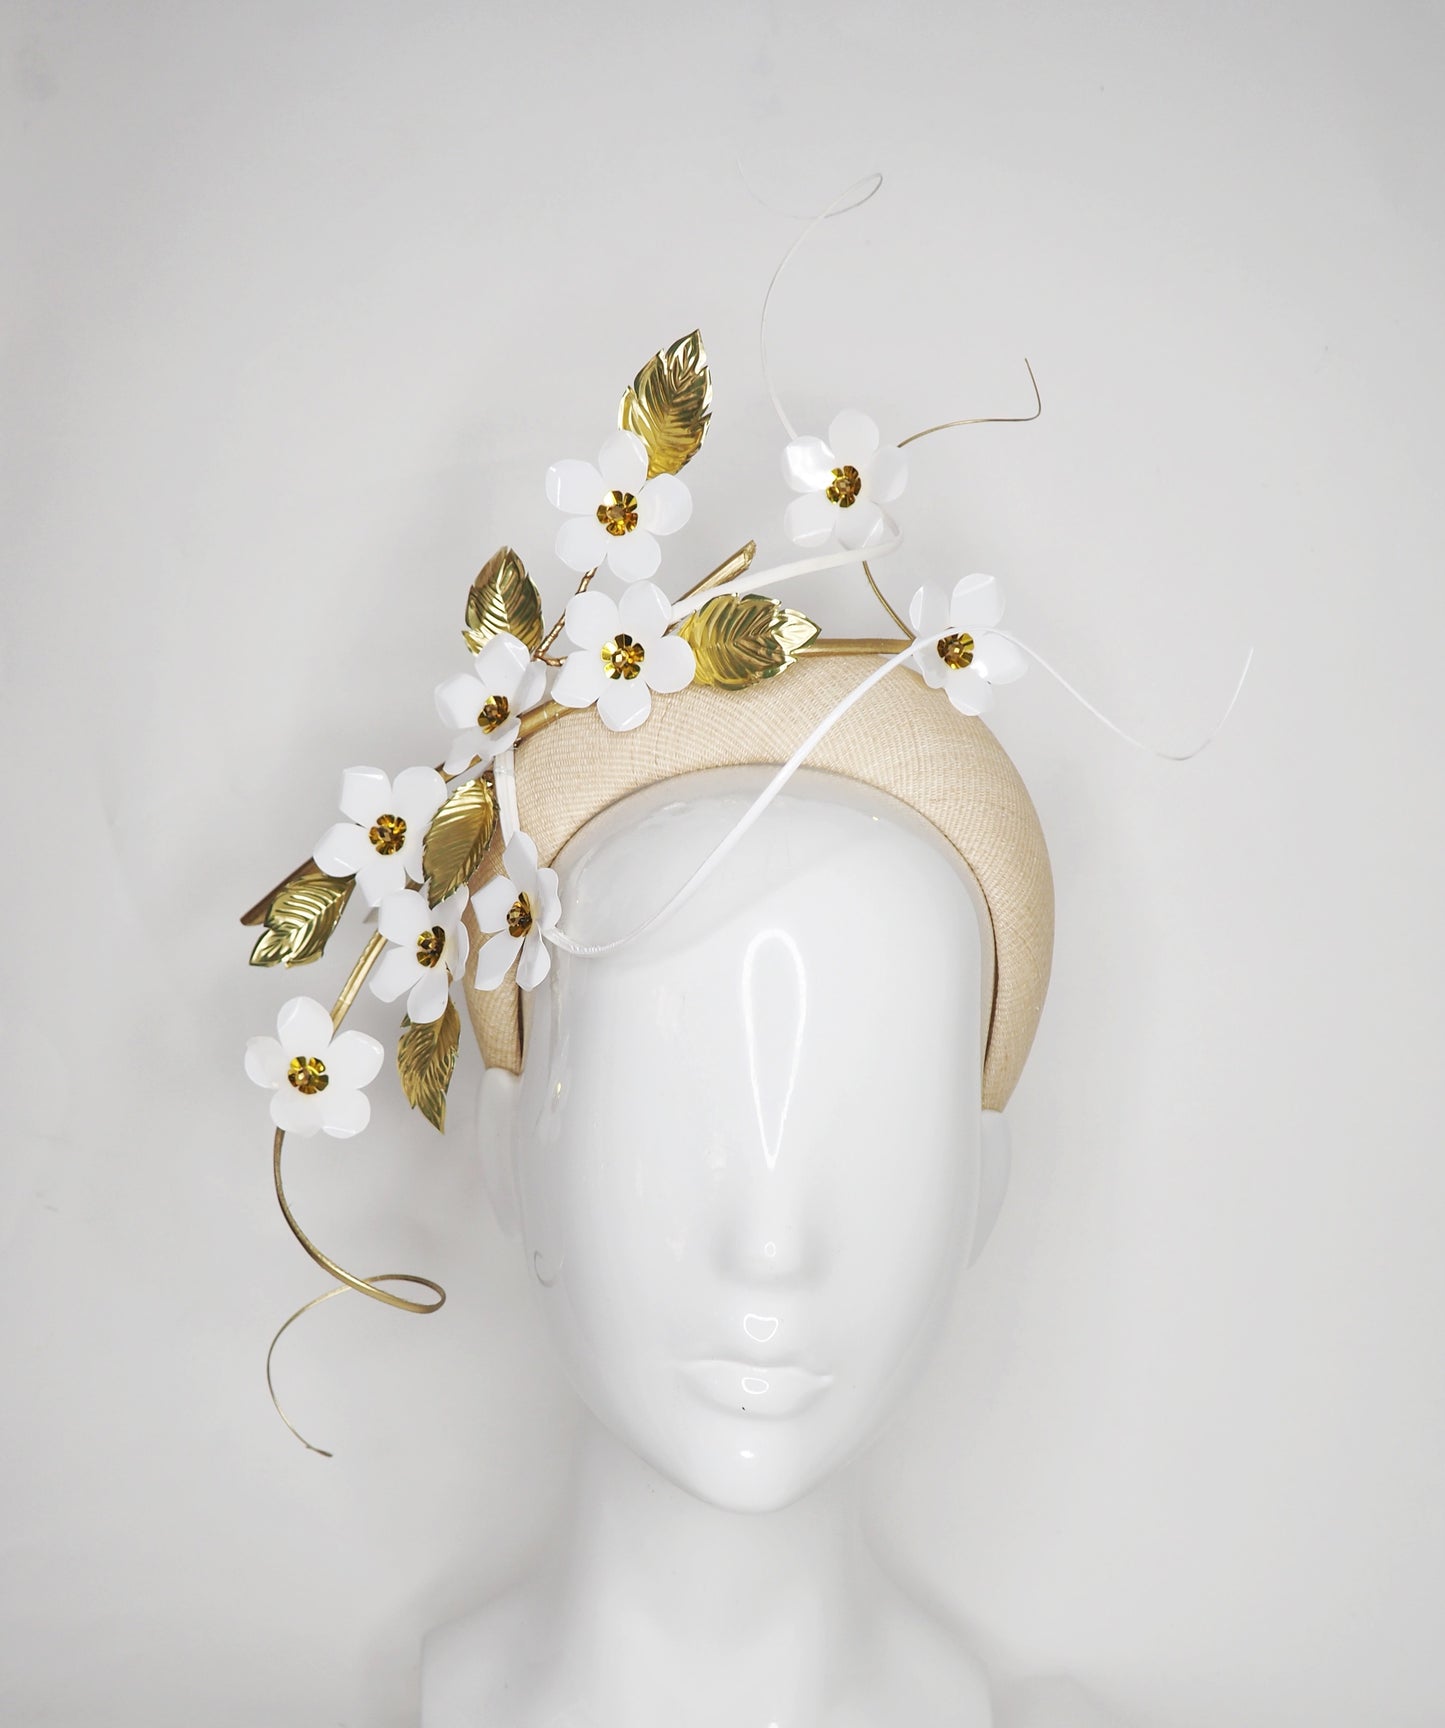 Blossom - White cherry blossoms on a natural straw 3D base with gold and white quills.